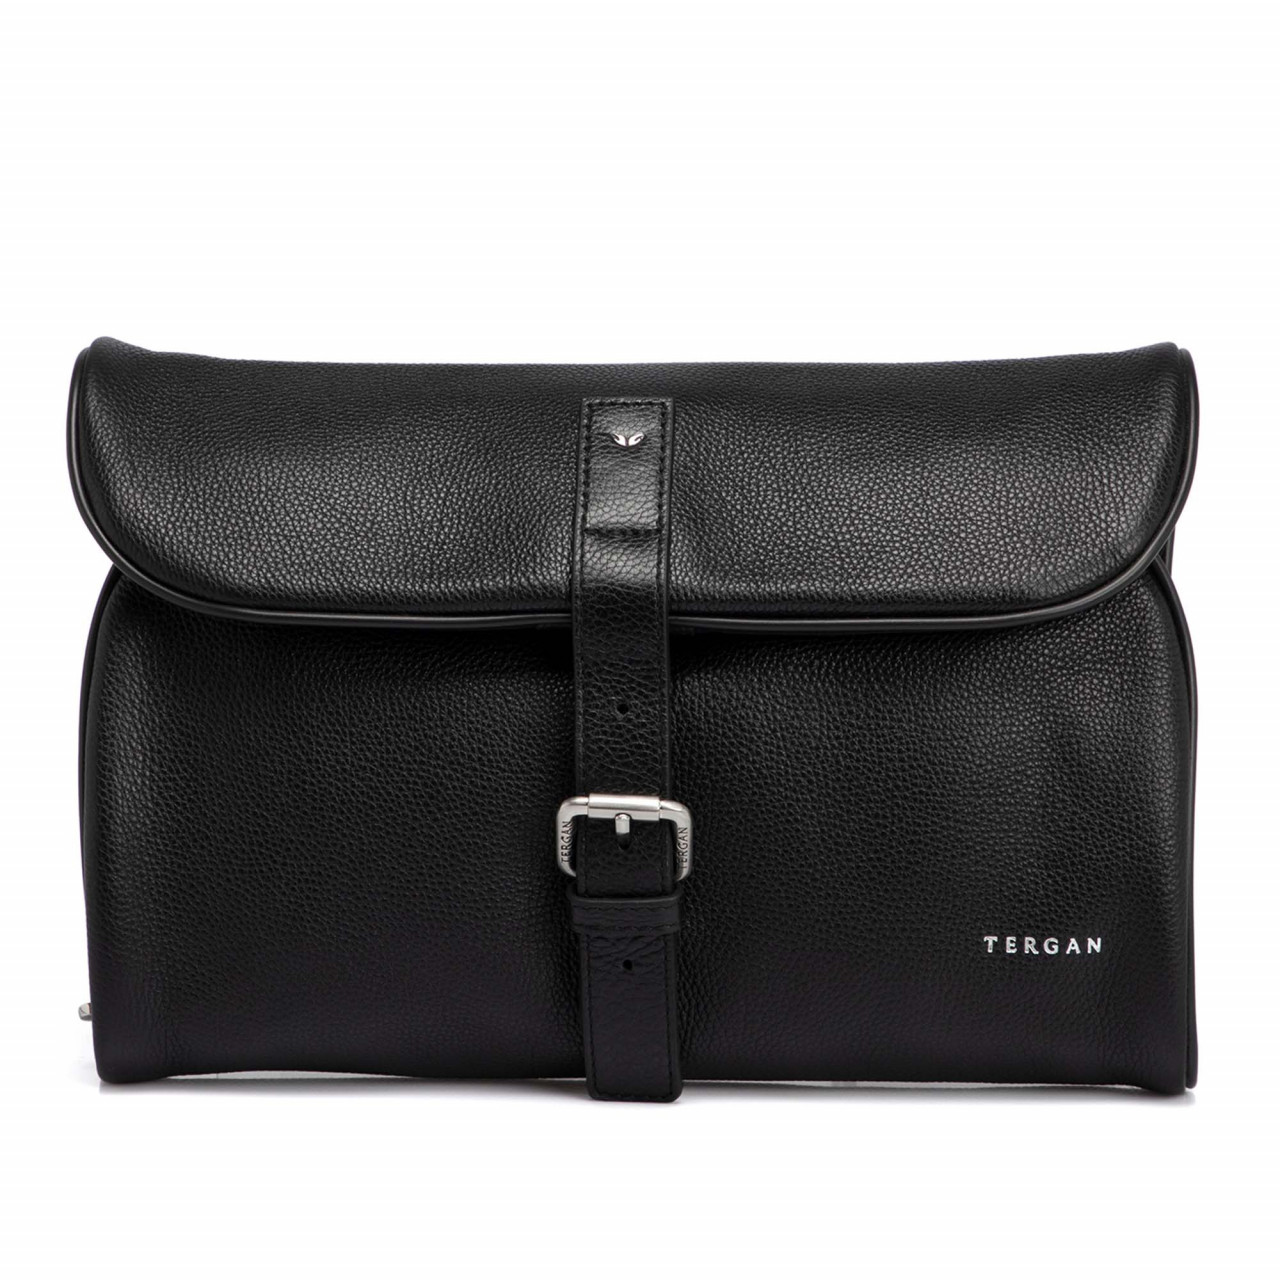 Men's leather toiletry bag